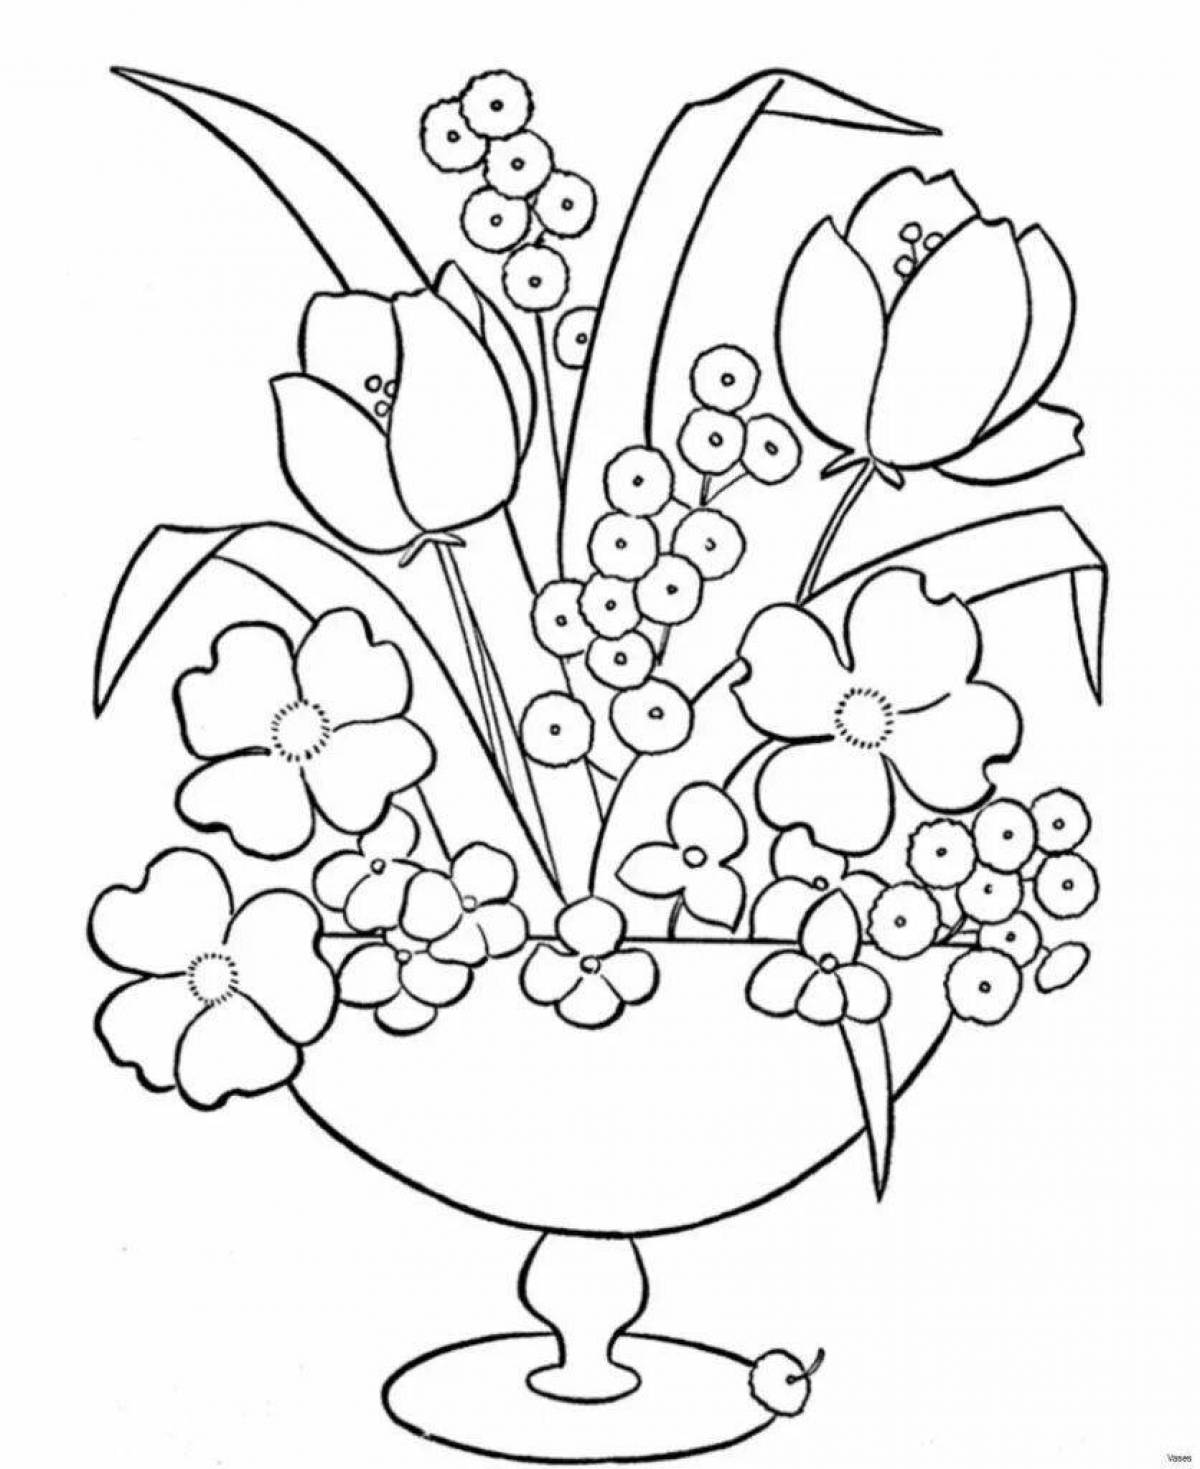 Inviting bouquet of flowers in a vase coloring book